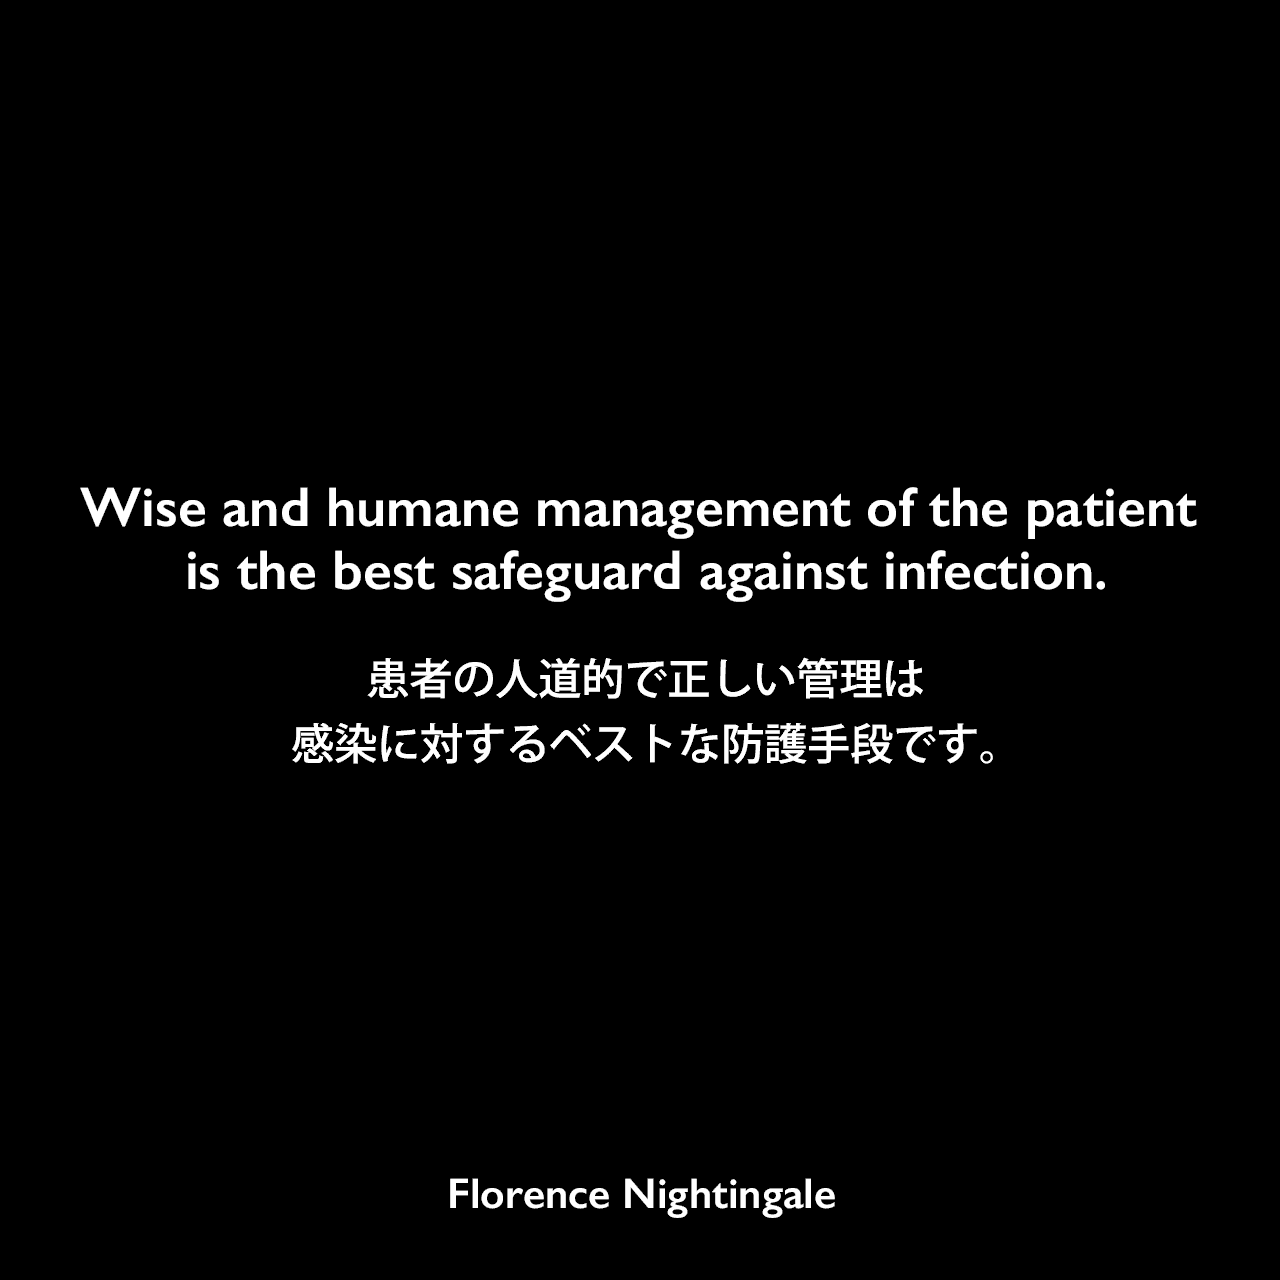 Wise and humane management of the patient is the best safeguard against infection.患者の人道的で正しい管理は、感染に対するベストな防護手段です。Florence Nightingale